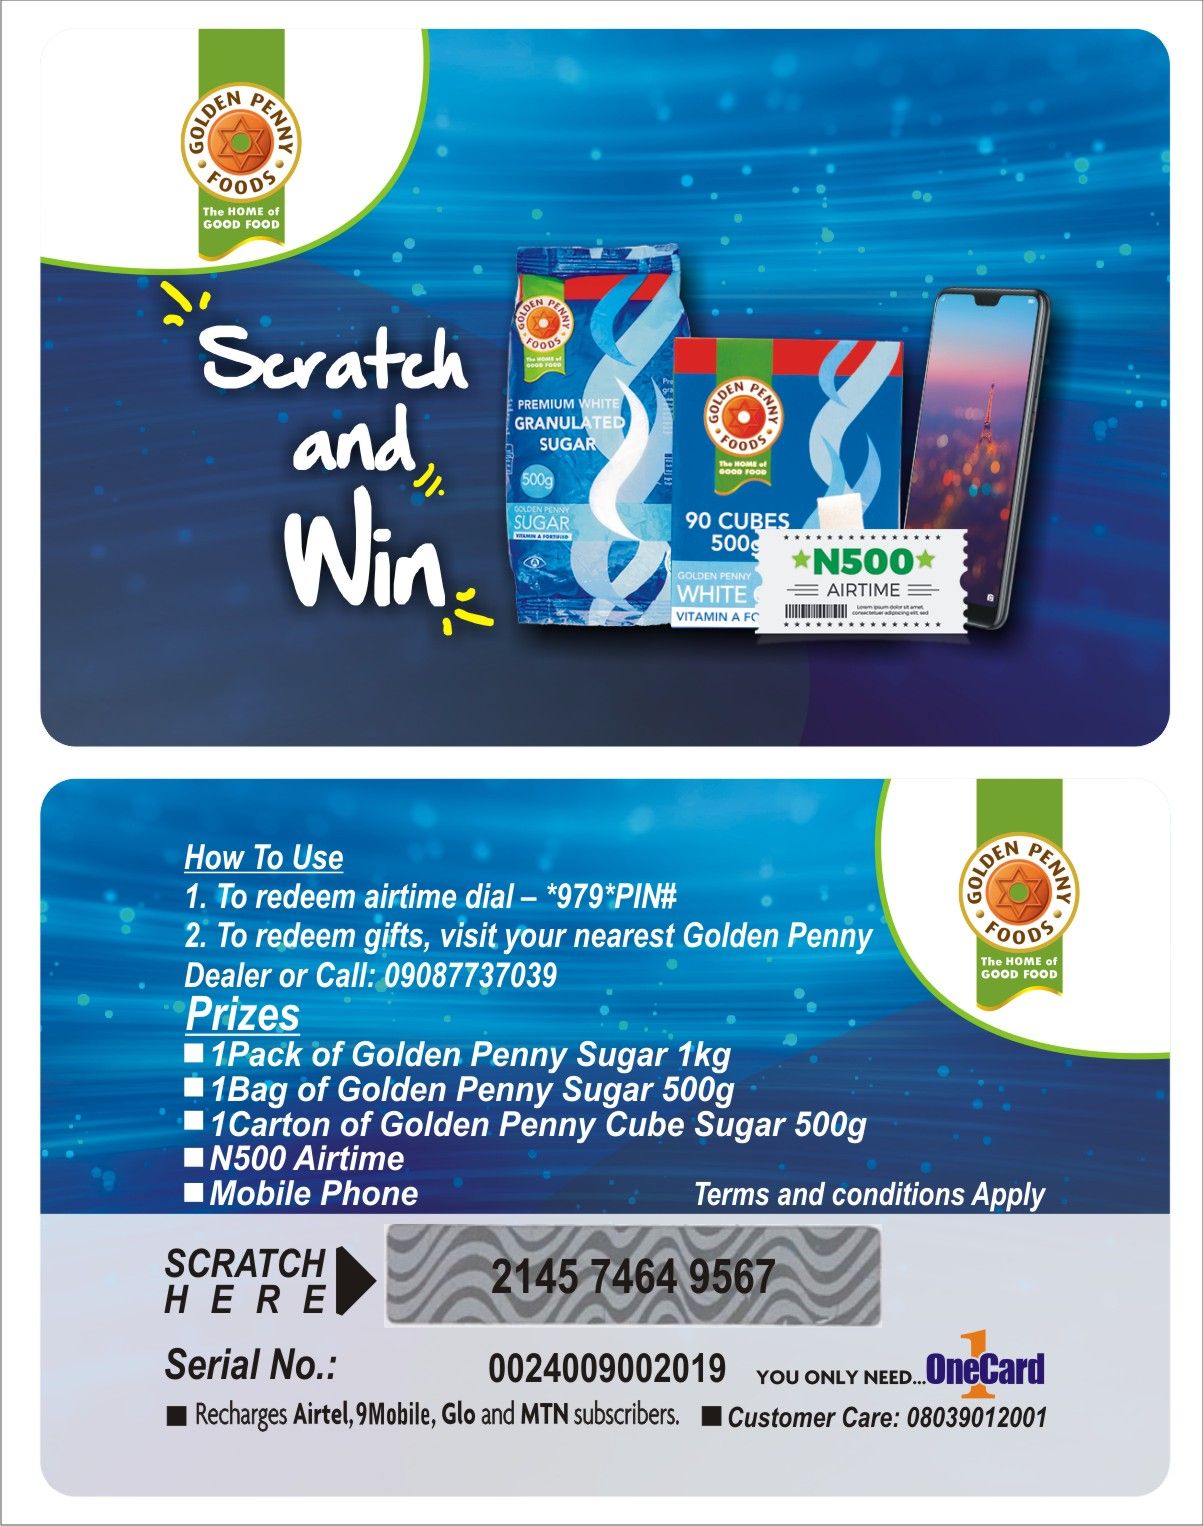 CALL CHINEDU ON 08179651585 TO PRINT SCRATCH AND WIN PROMO CARDS, RECHARGE CARDS, PORTAL ACCESS SCRATCH CARDS, LOTTERY CARDS